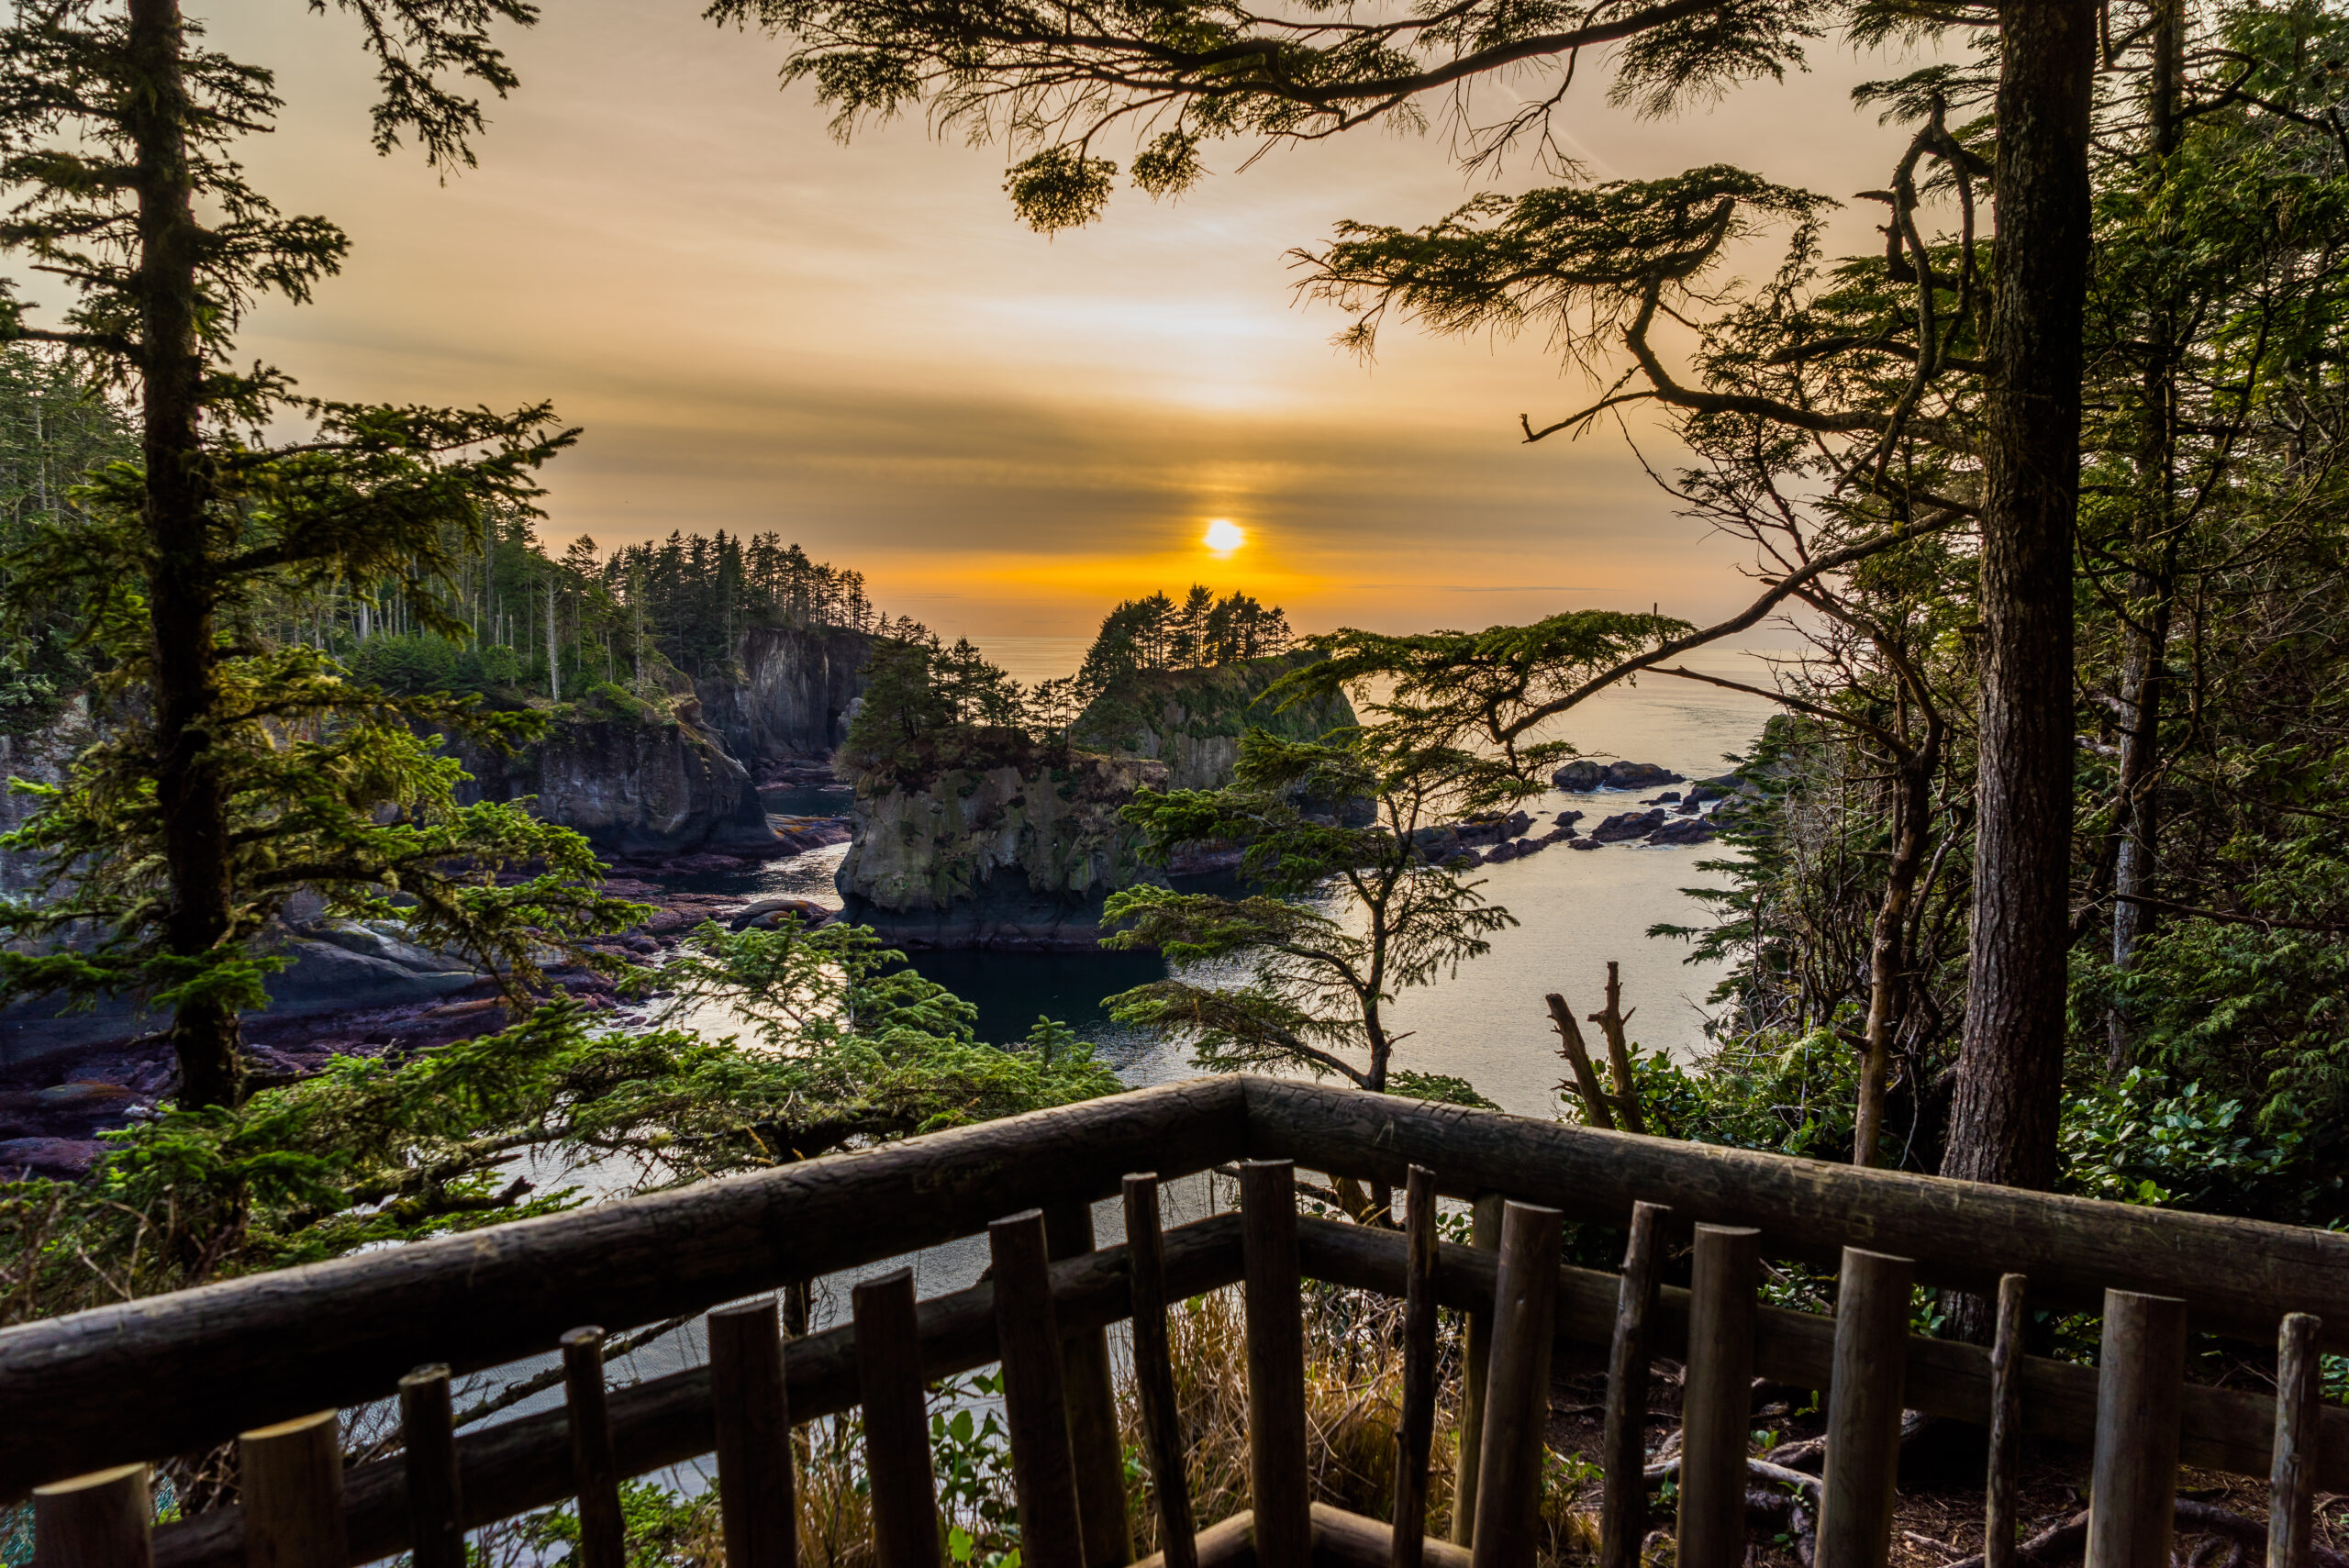 sunset over the pacific ocean in olympic national park, as seen from a wooden deck. olympic national park is one of the best road trips from seattle washington.